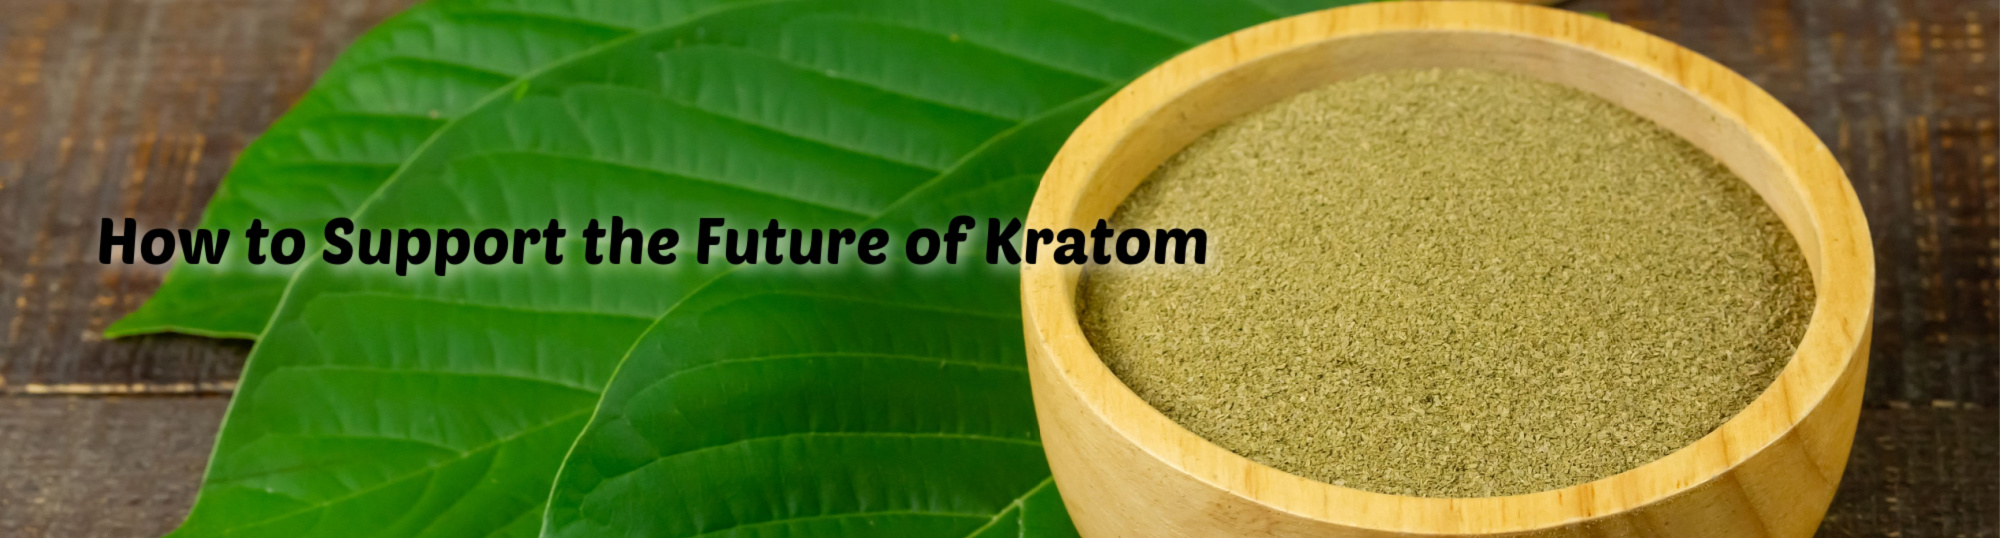 image of how to support the future of kratom